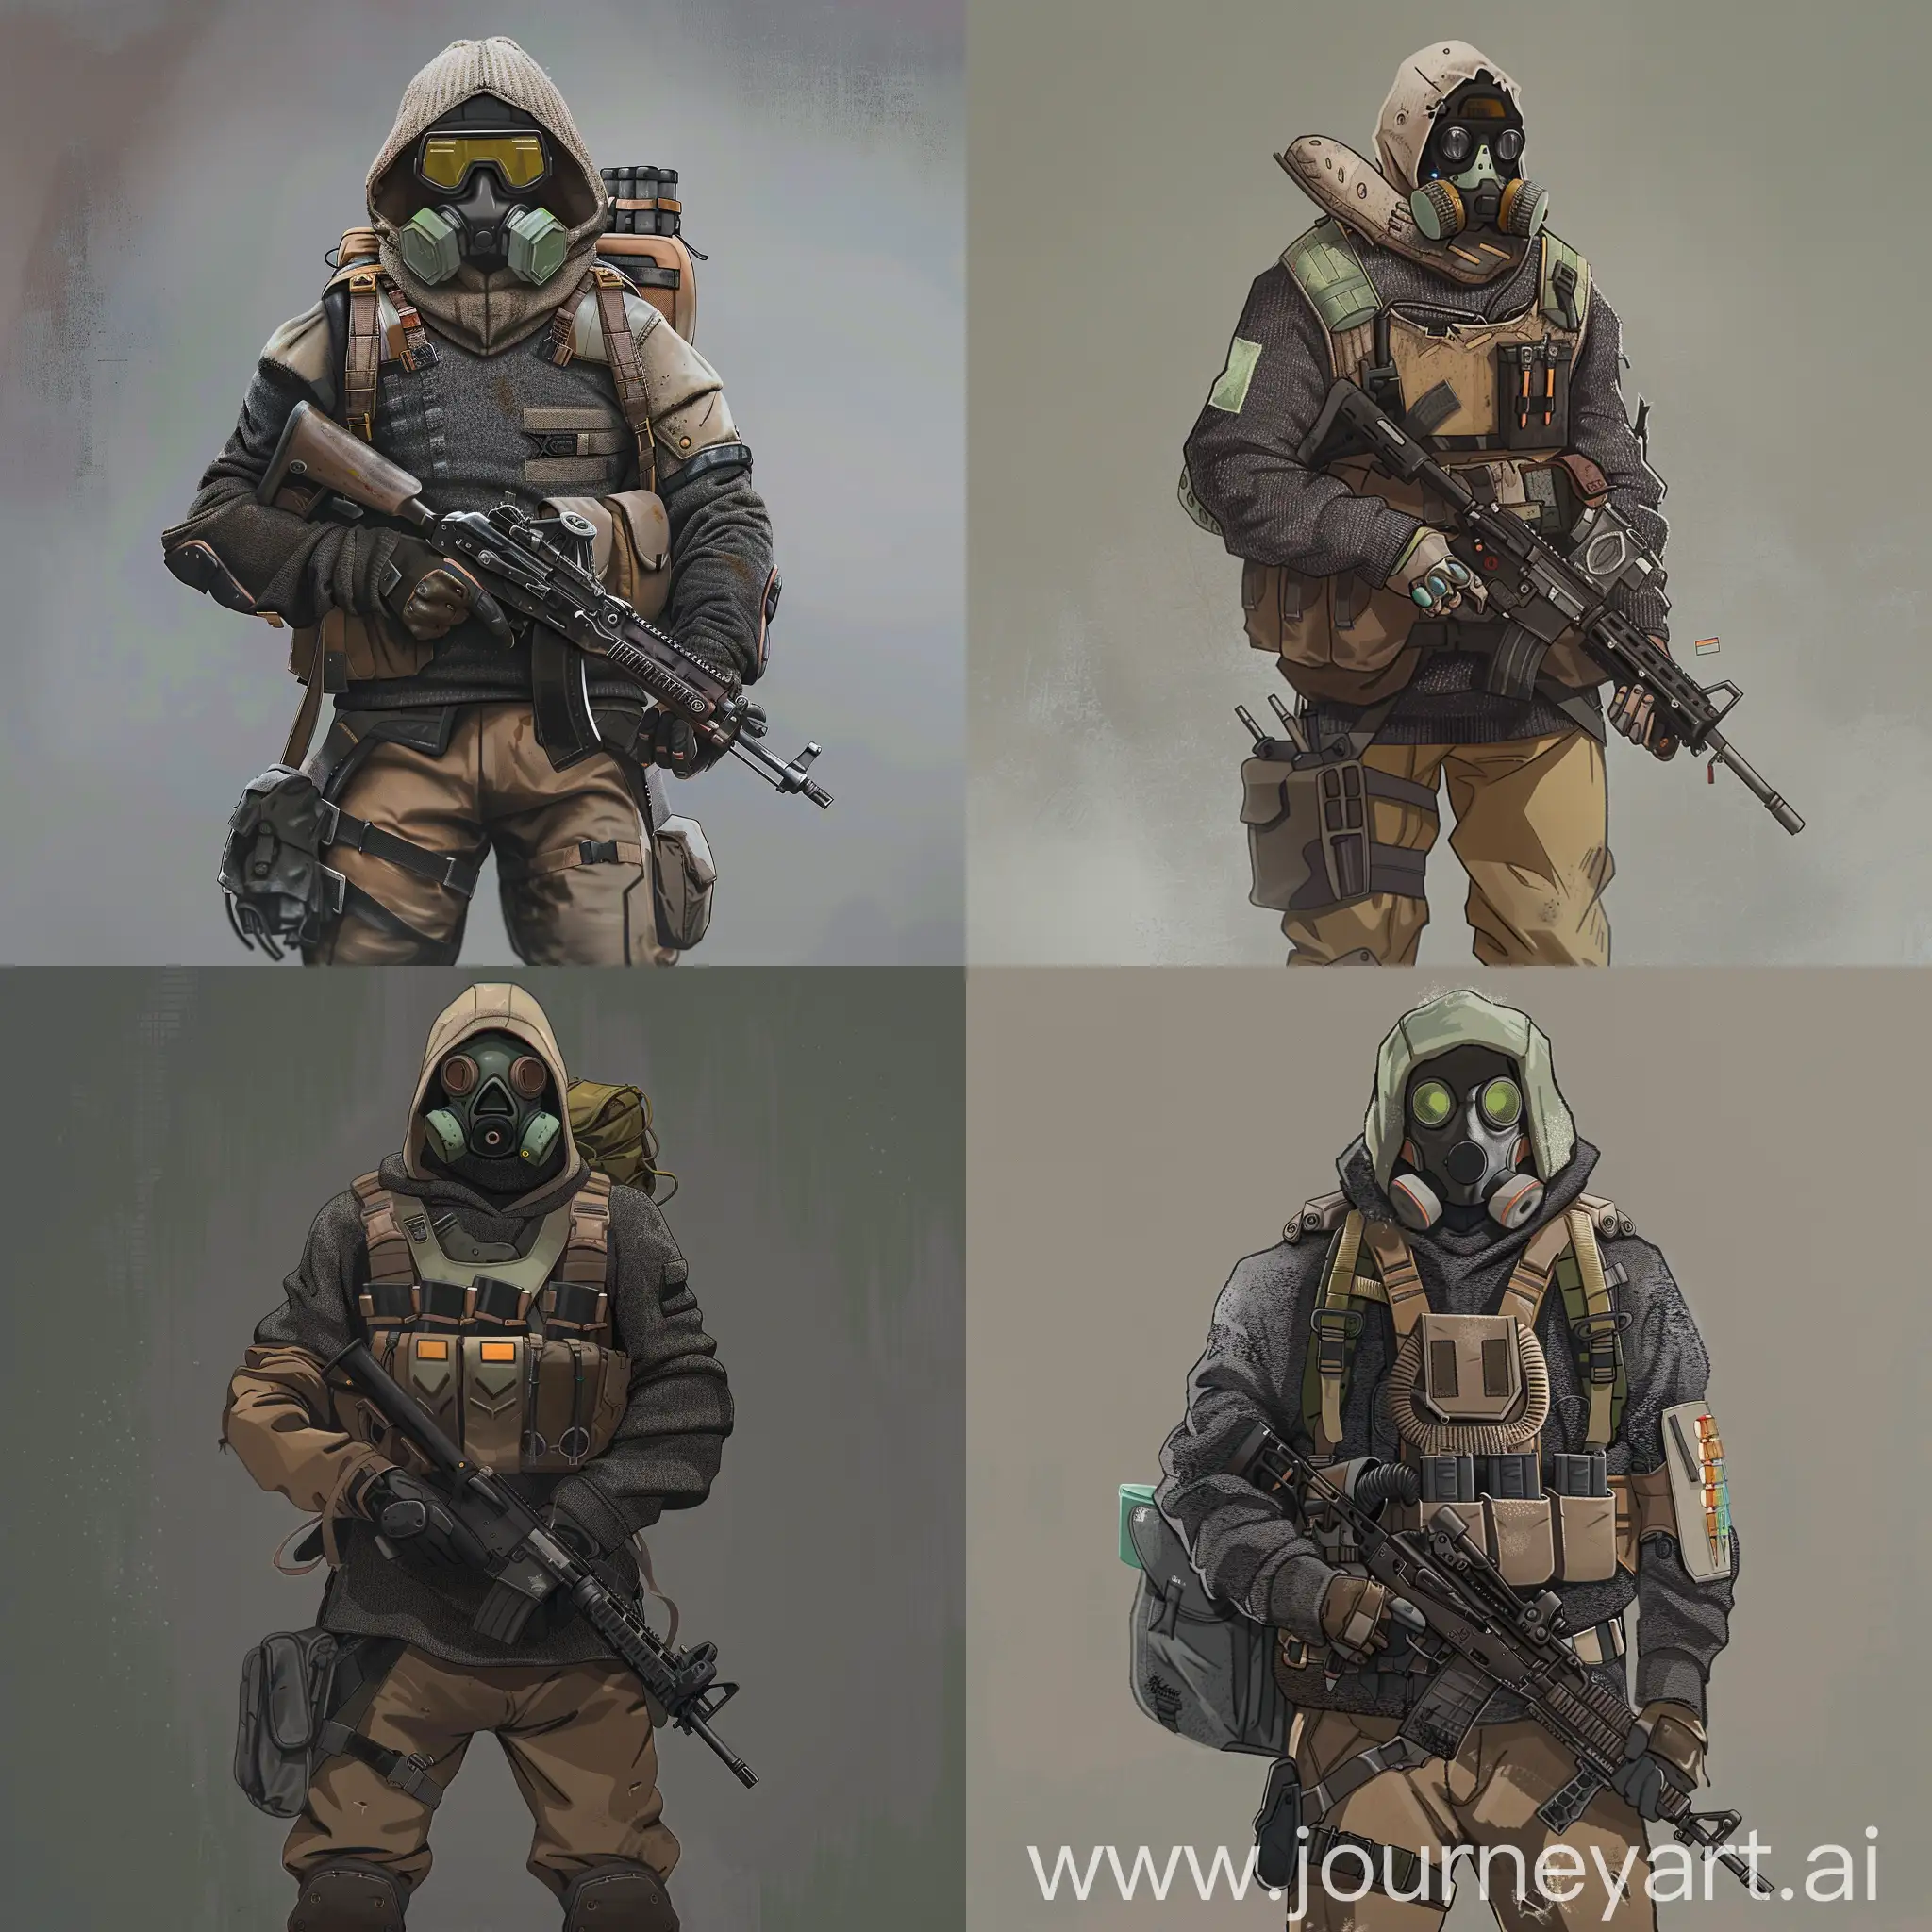 Stalker-in-Dark-Gray-Sweater-with-Gas-Mask-and-Rifle